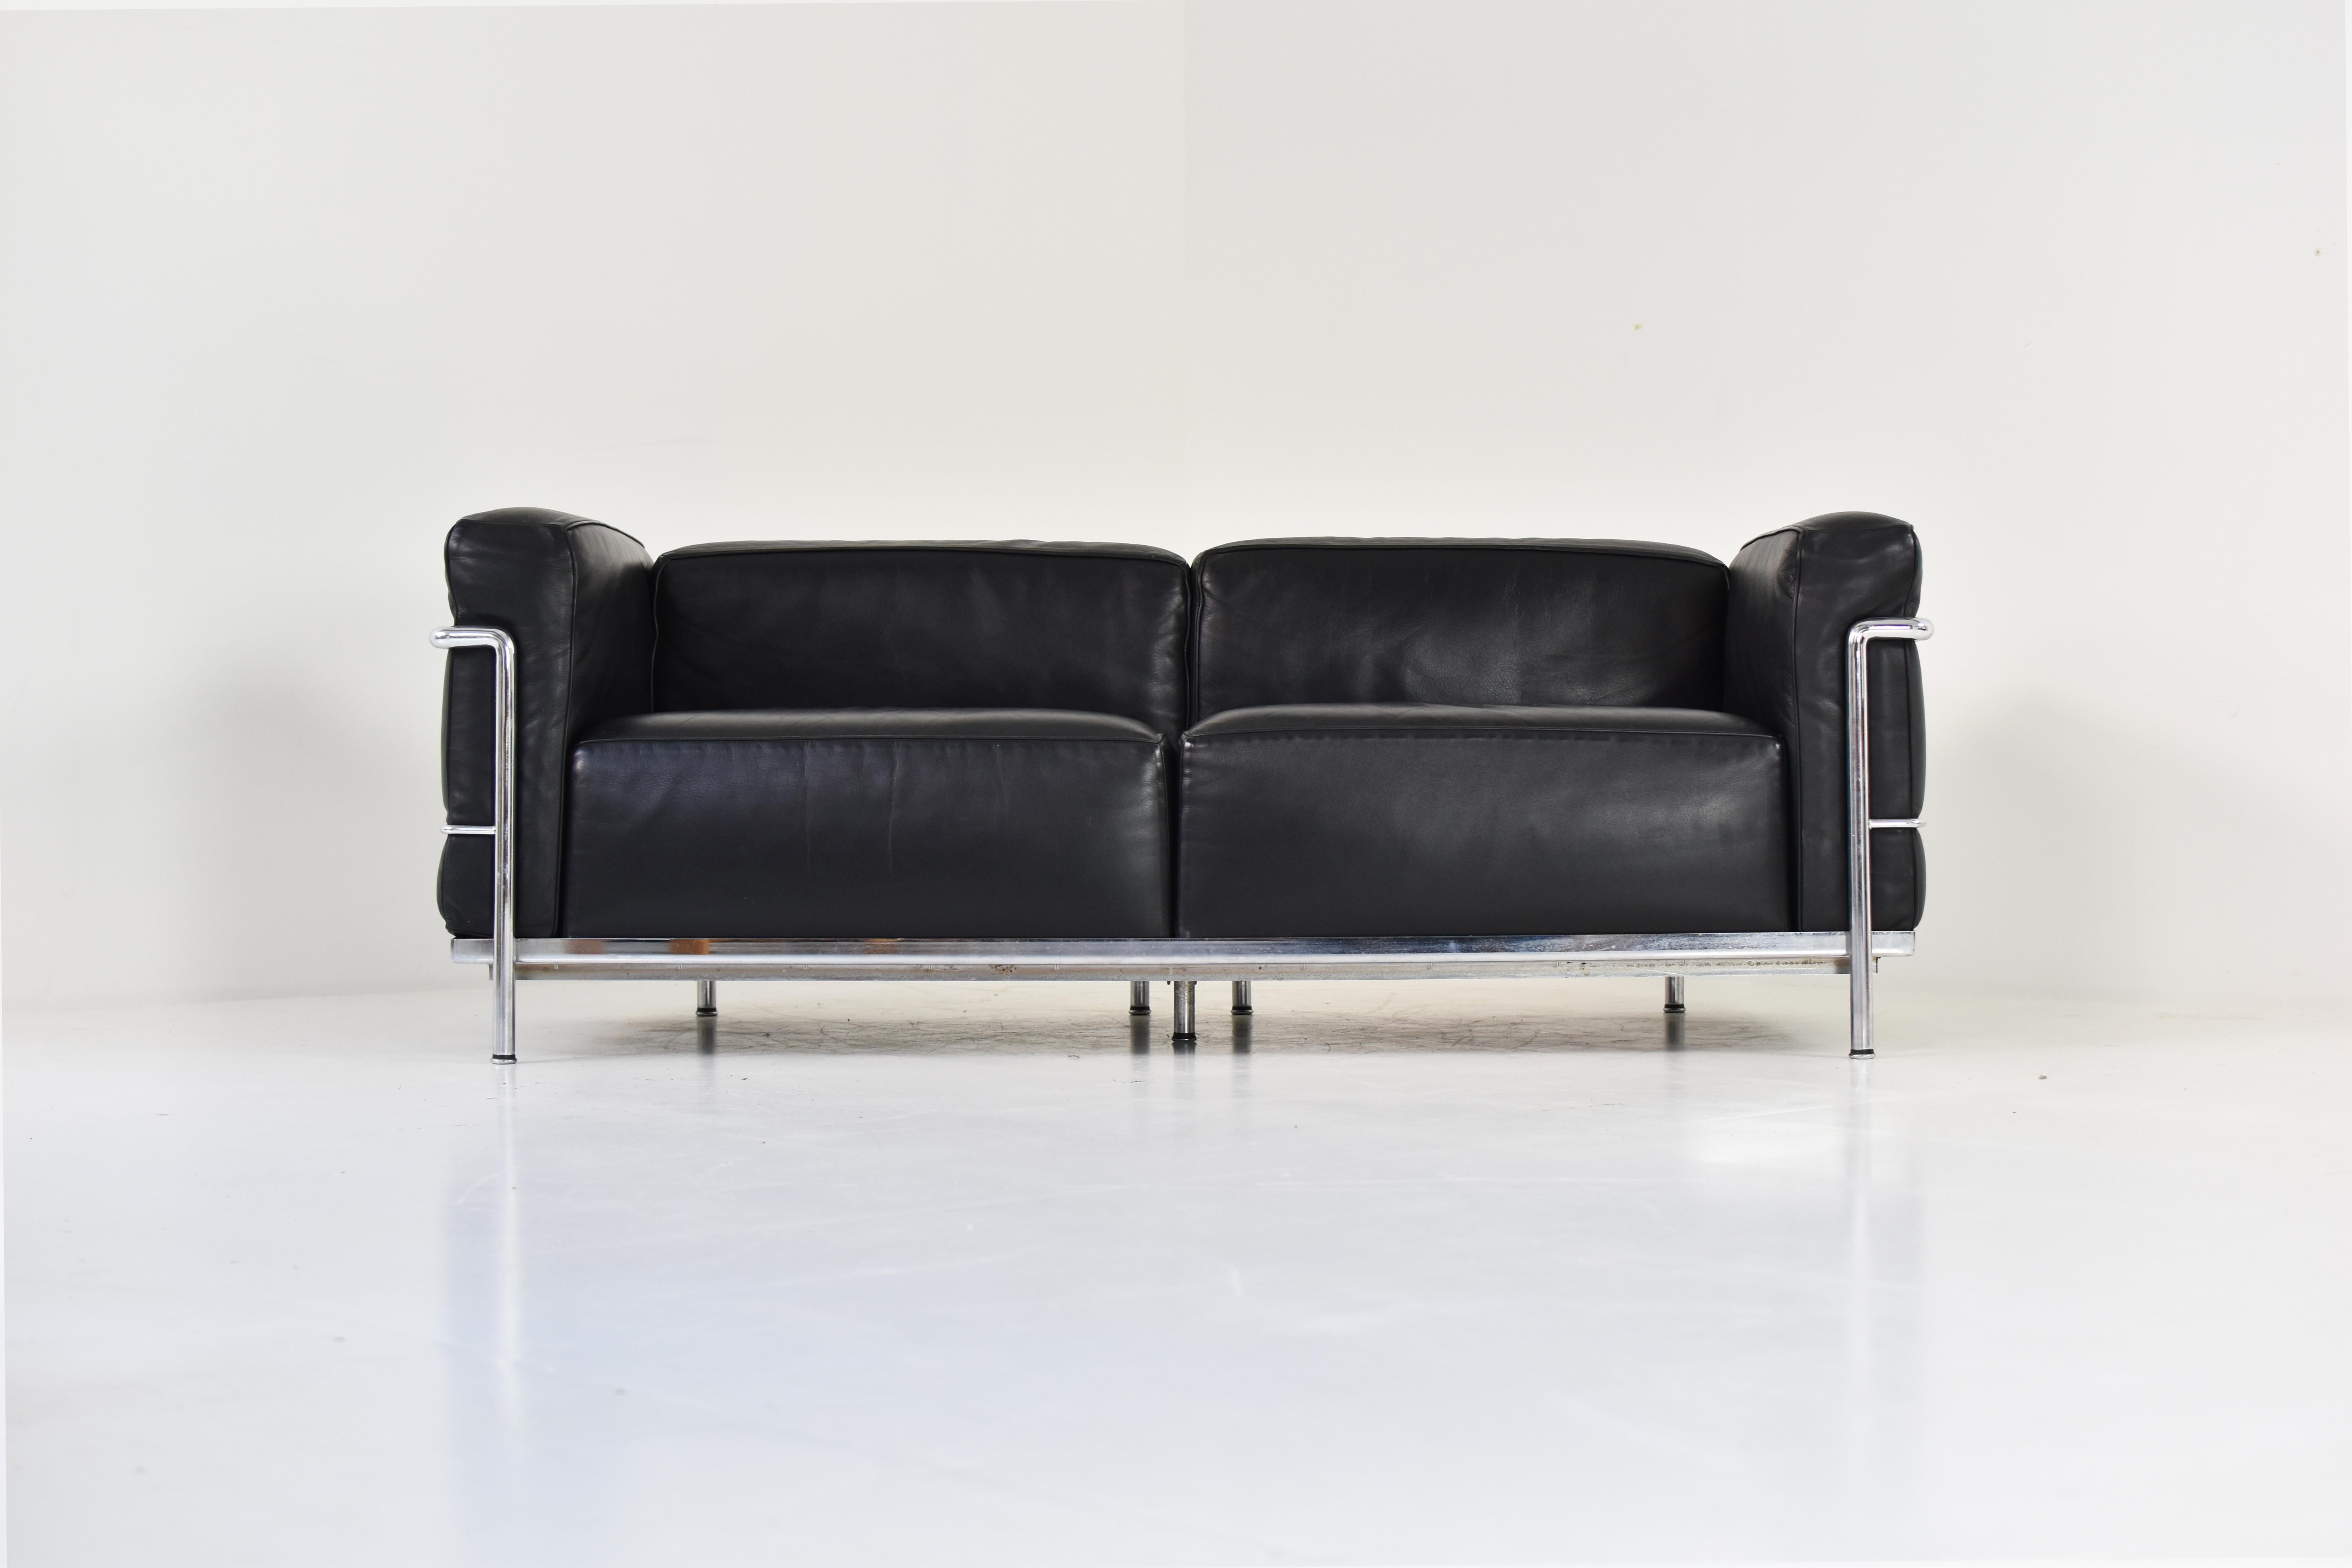 Iconic ‘LC3’ sofa designed by Le Corbusier, Pierre Jeanneret and Charlotte Perriand for Cassina. Originally designed in 1928, our example is a vintage edition from the 1990s. Very good original condition. Signed